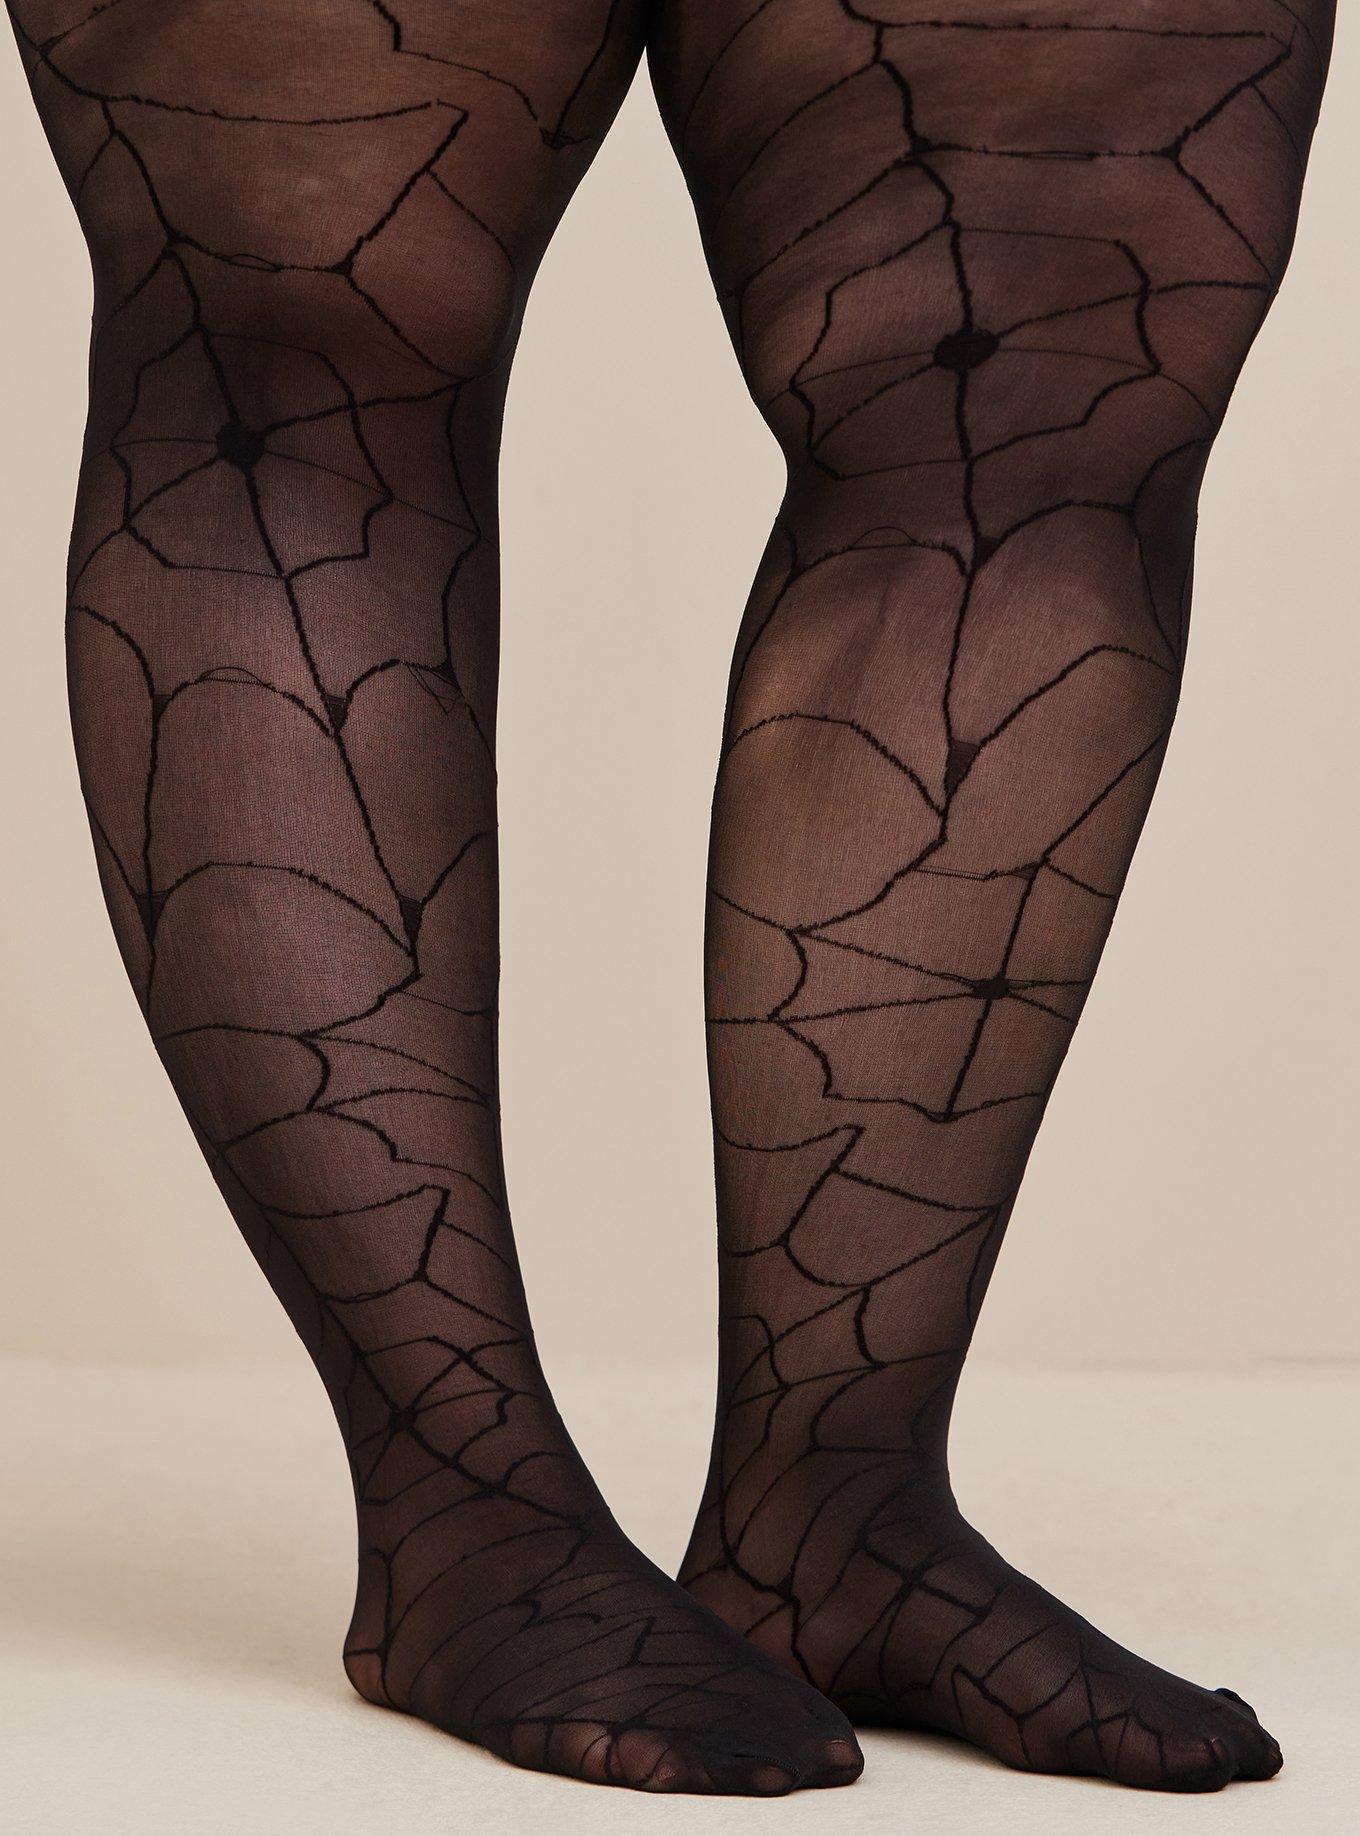 Paper Airplane Tights for Women, Plus Size Tights, Patterned